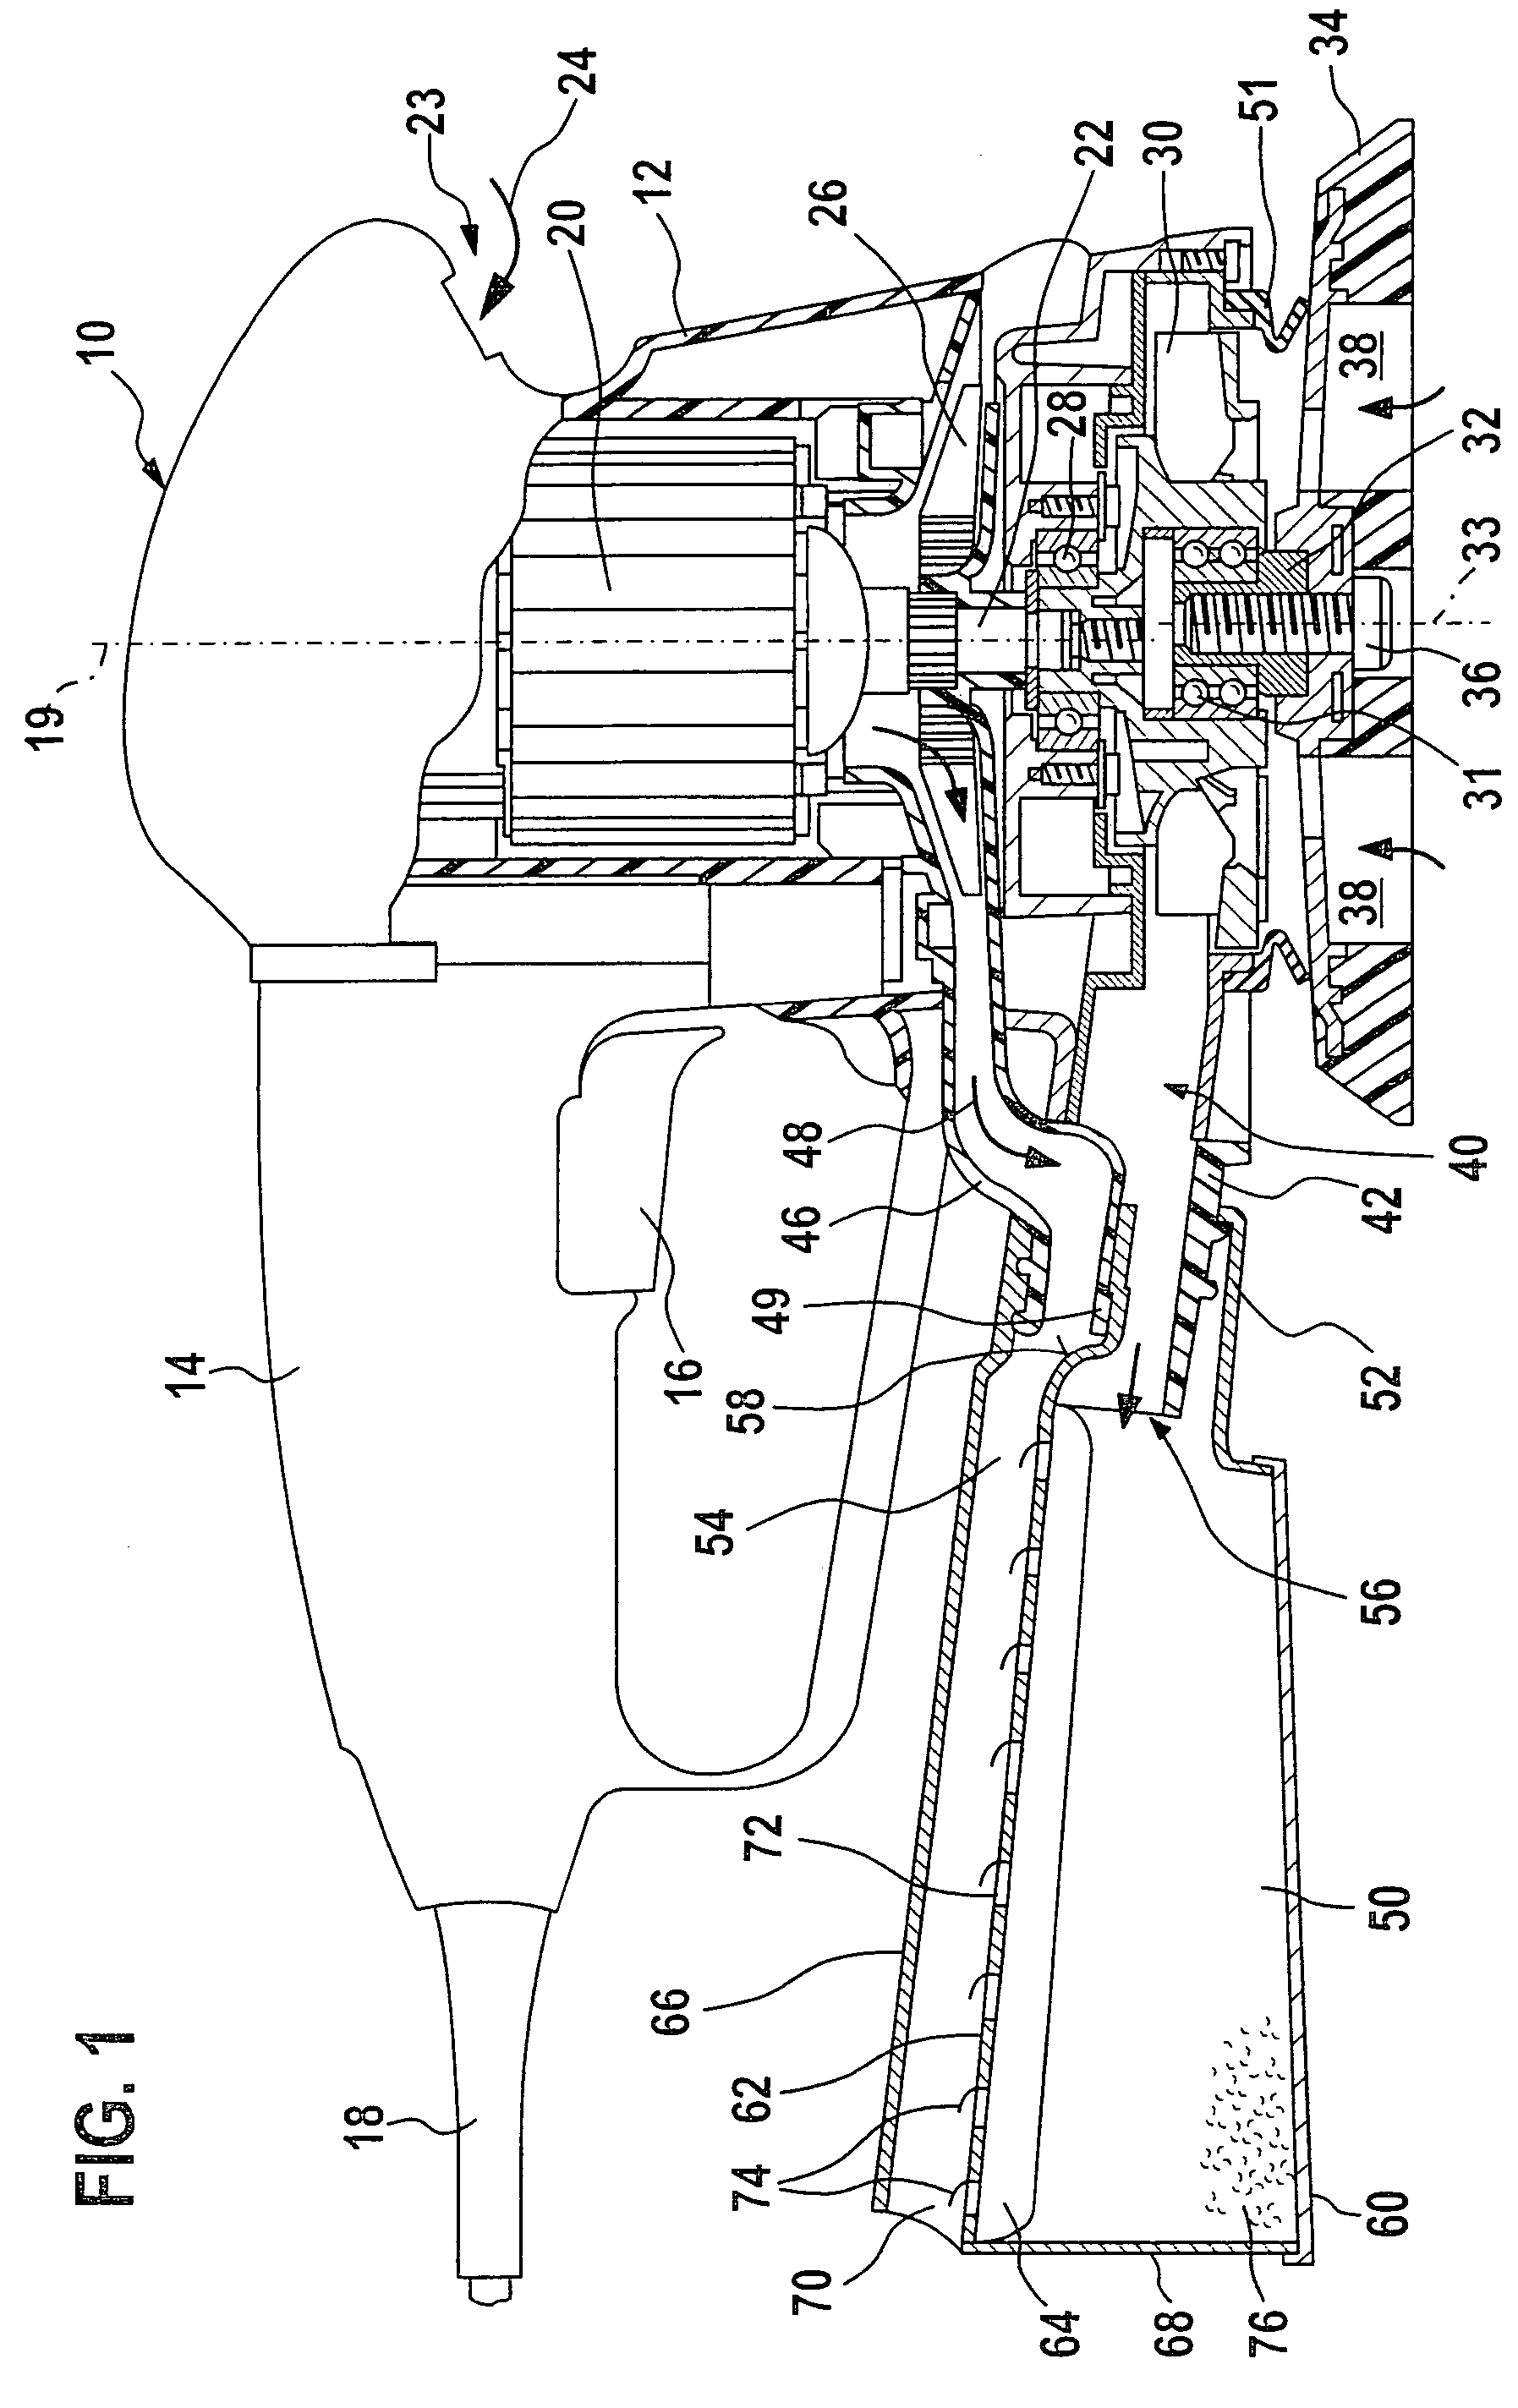 Hand-held machine tool comprising a dust box